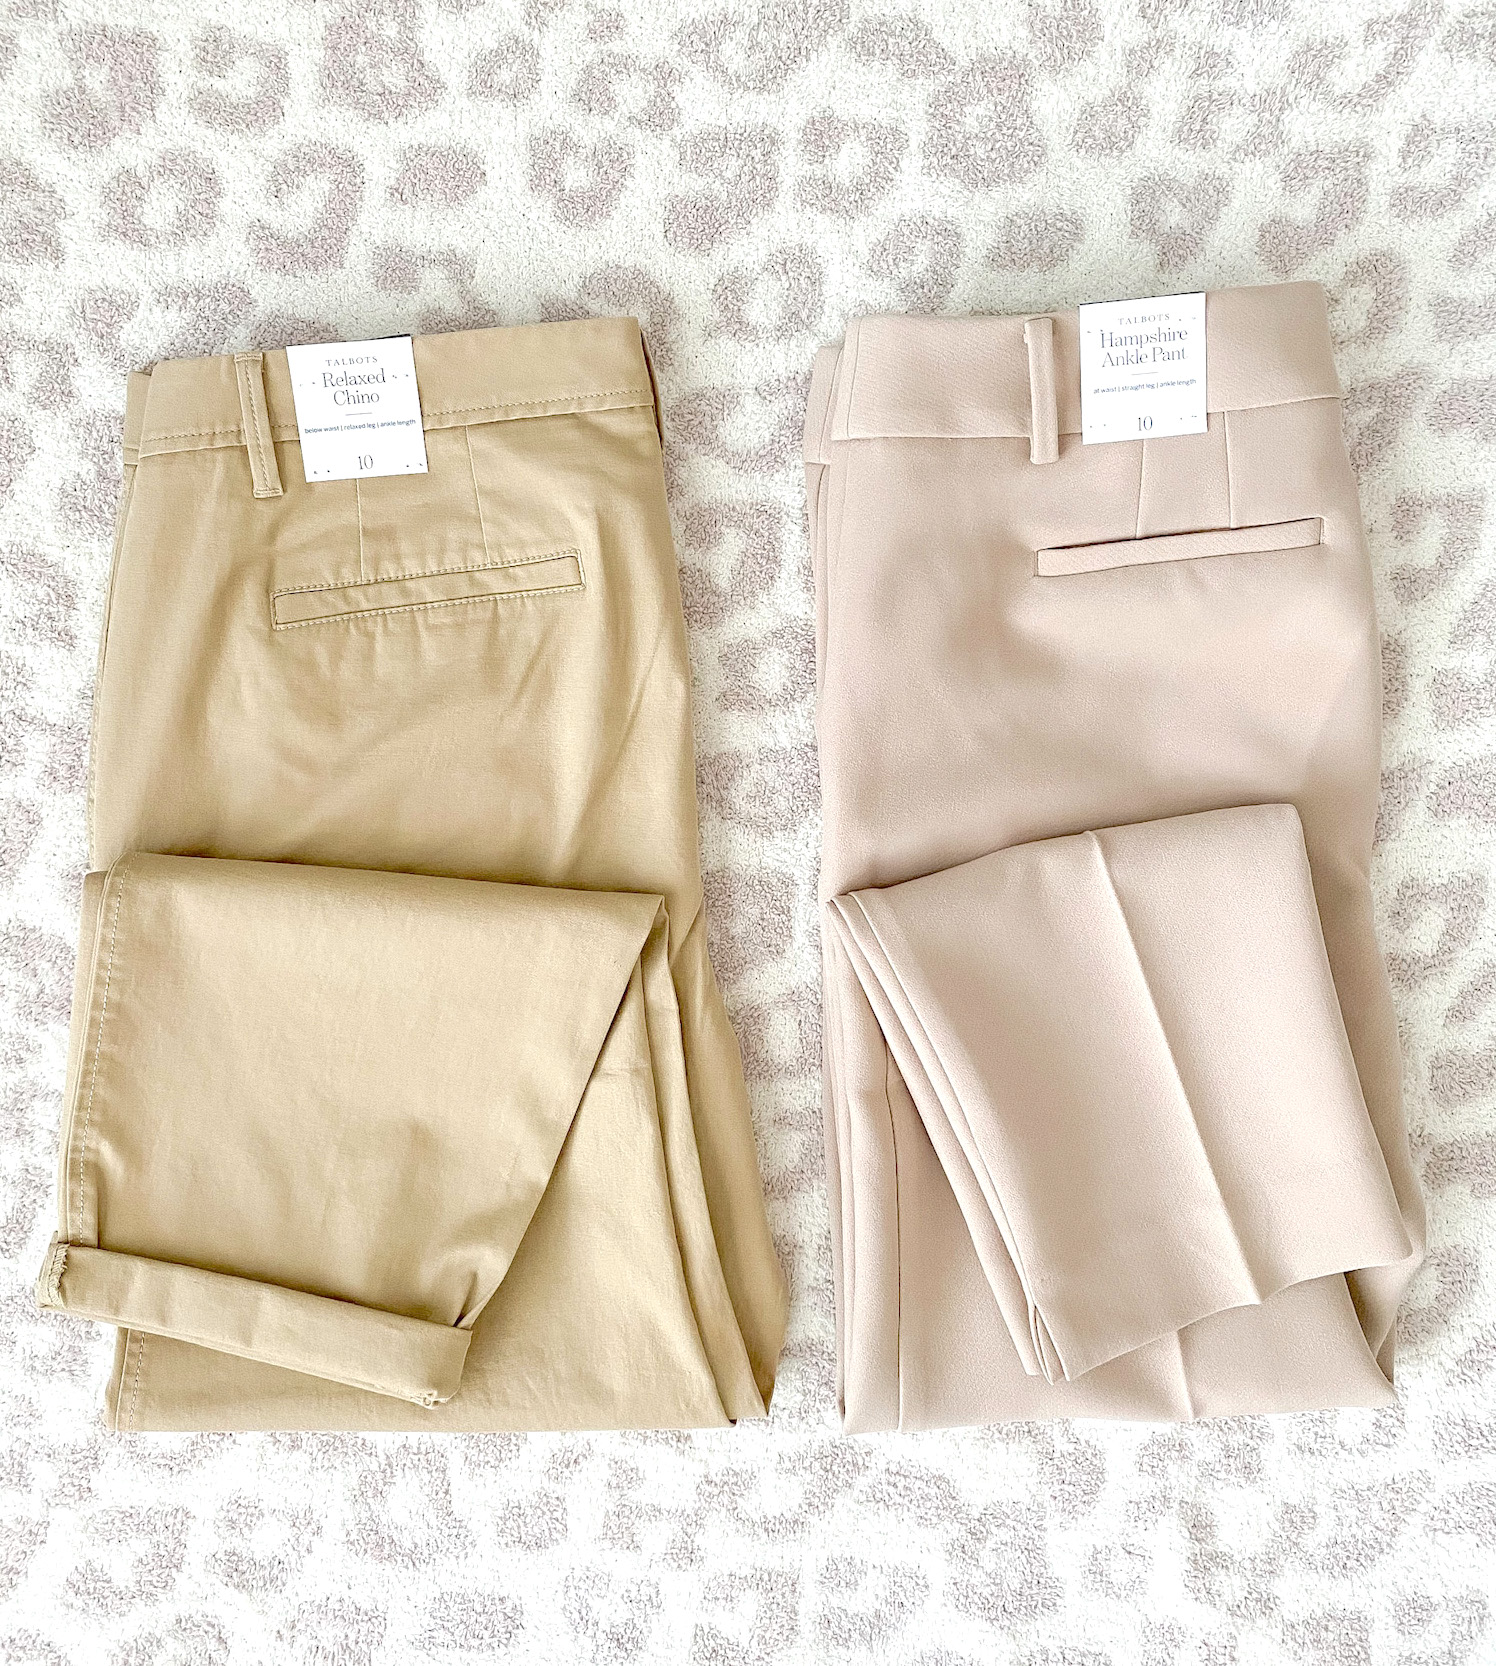 Try-On Reviews: Talbots Hampshire Pants & Relaxed Chinos - Classy Yet Trendy